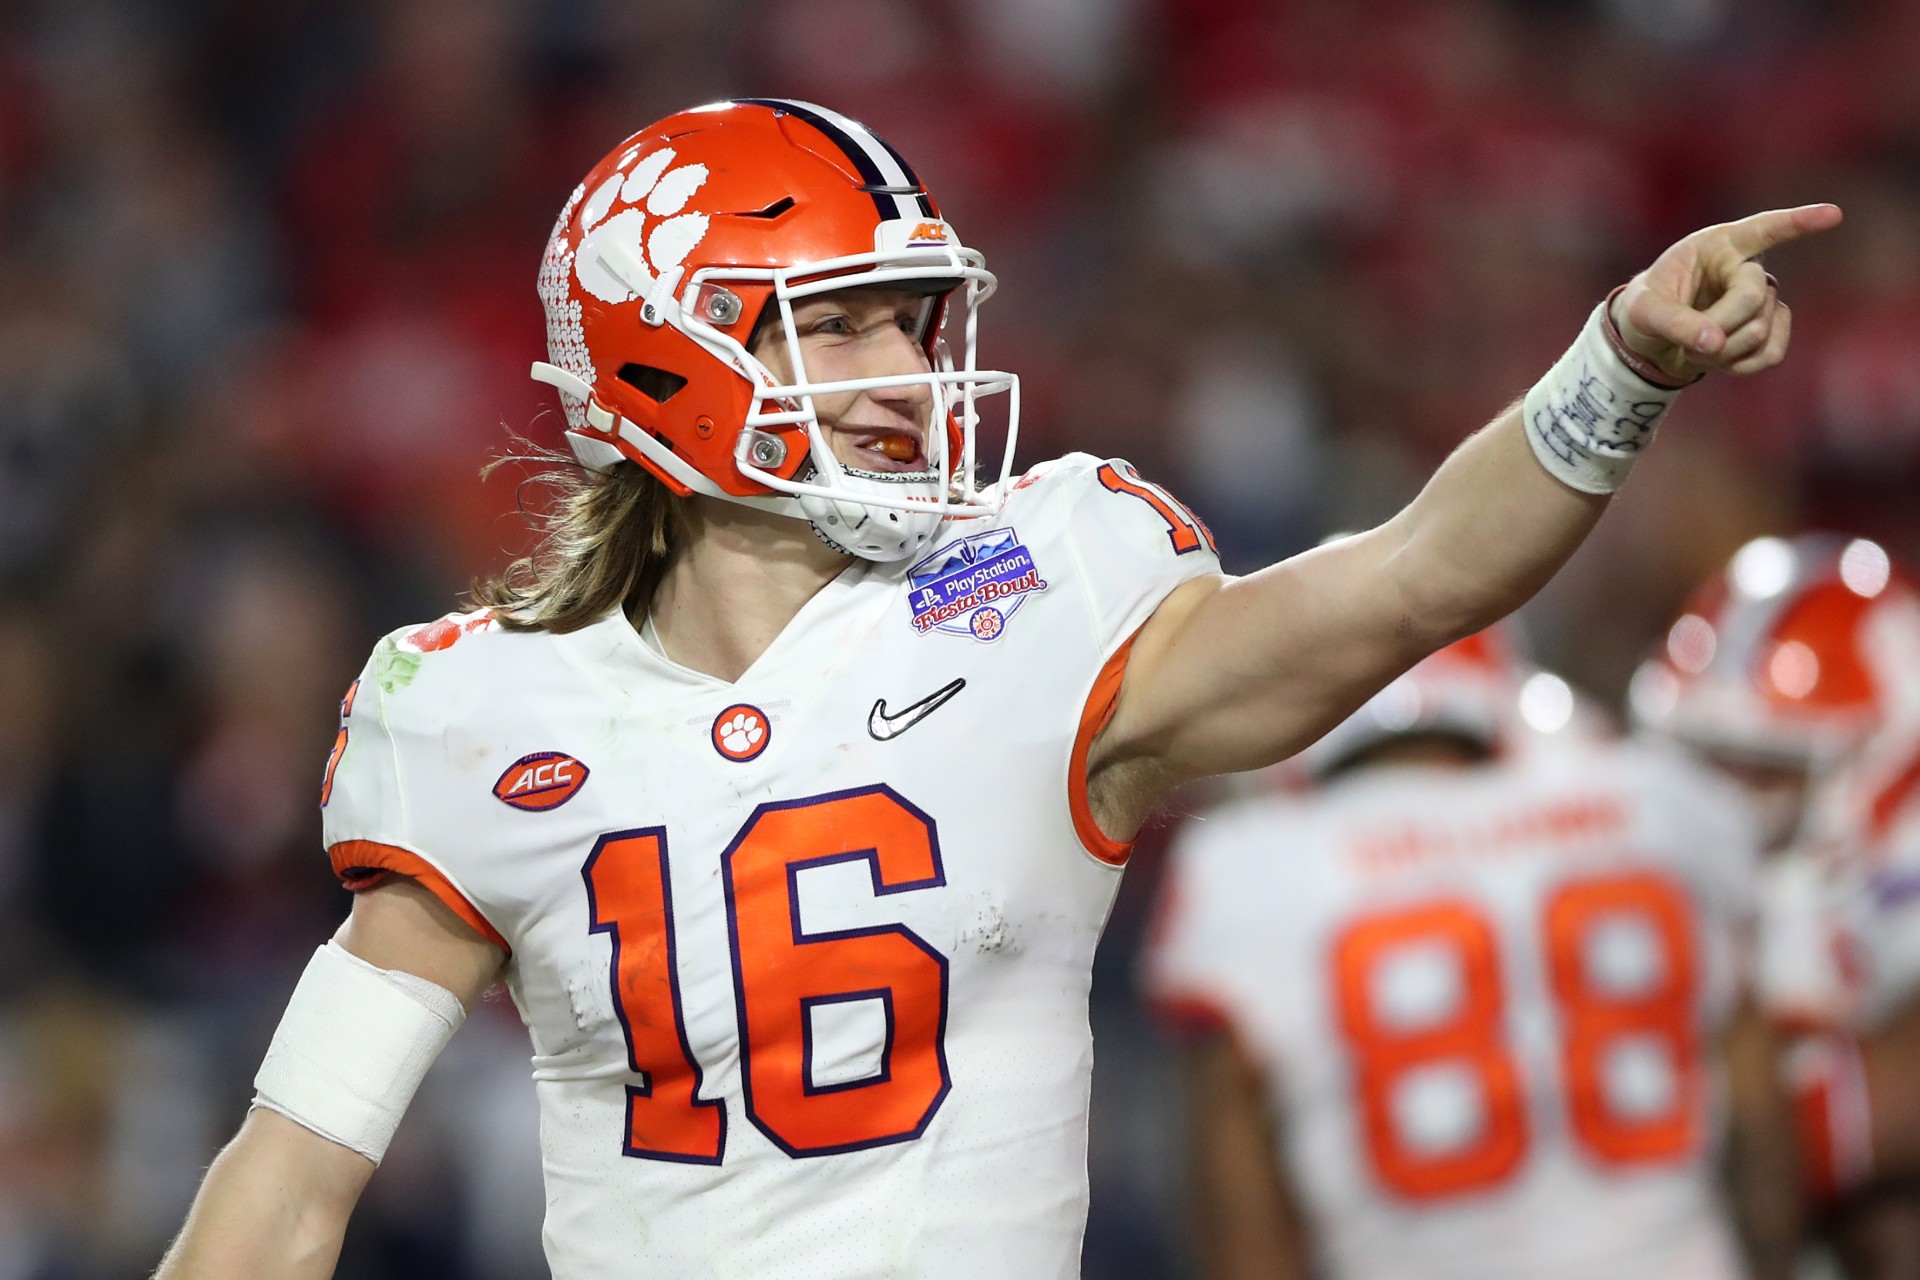 Trevor Lawrence noncommittal about Clemson vs. NFL Draft plans for 2021.